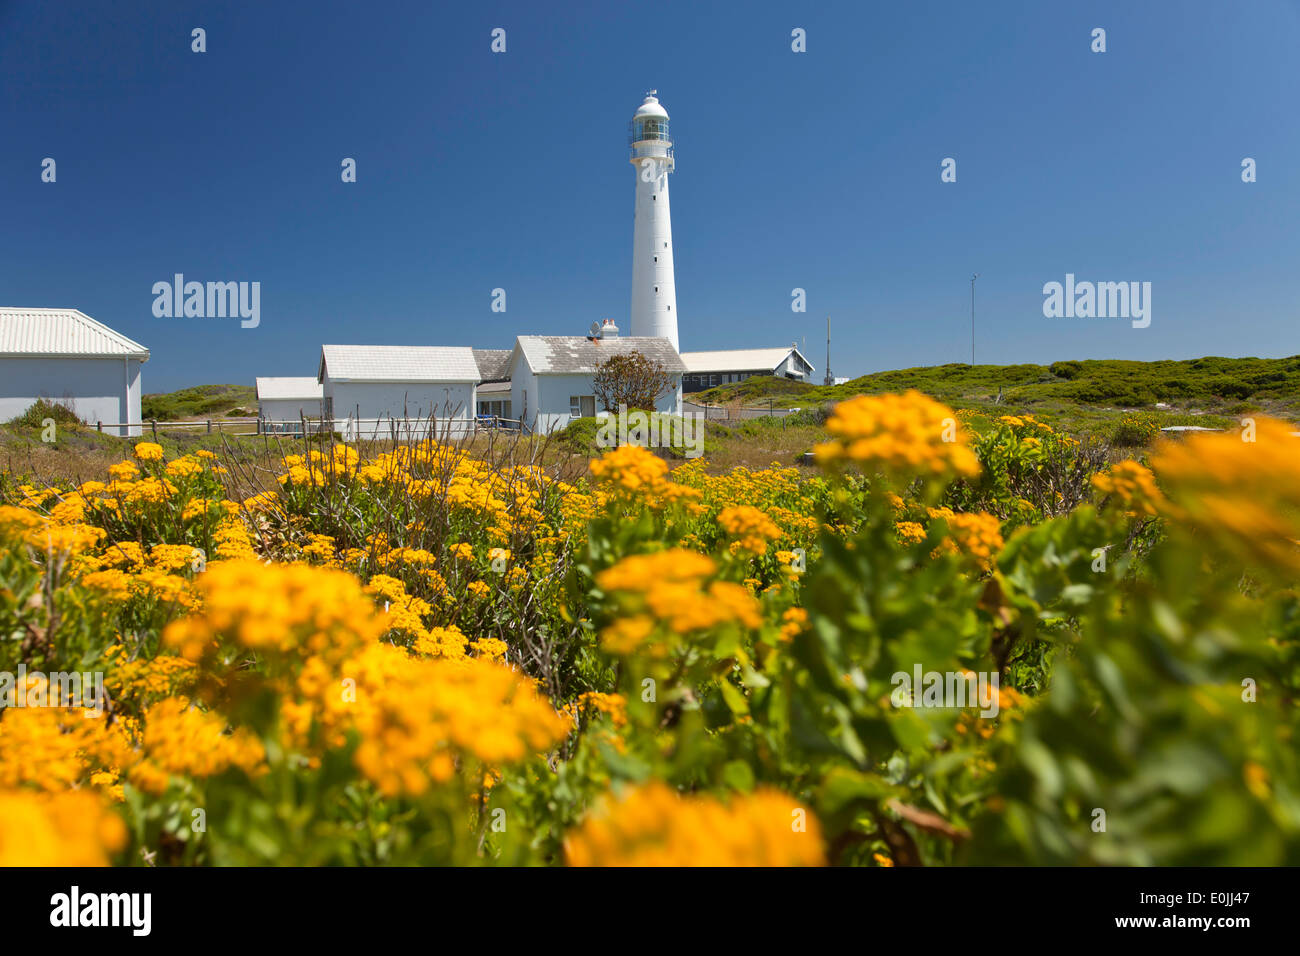 Slangkop Lighthouse near Kommetjie, Cape Town, Western Cape, South Africa Stock Photo